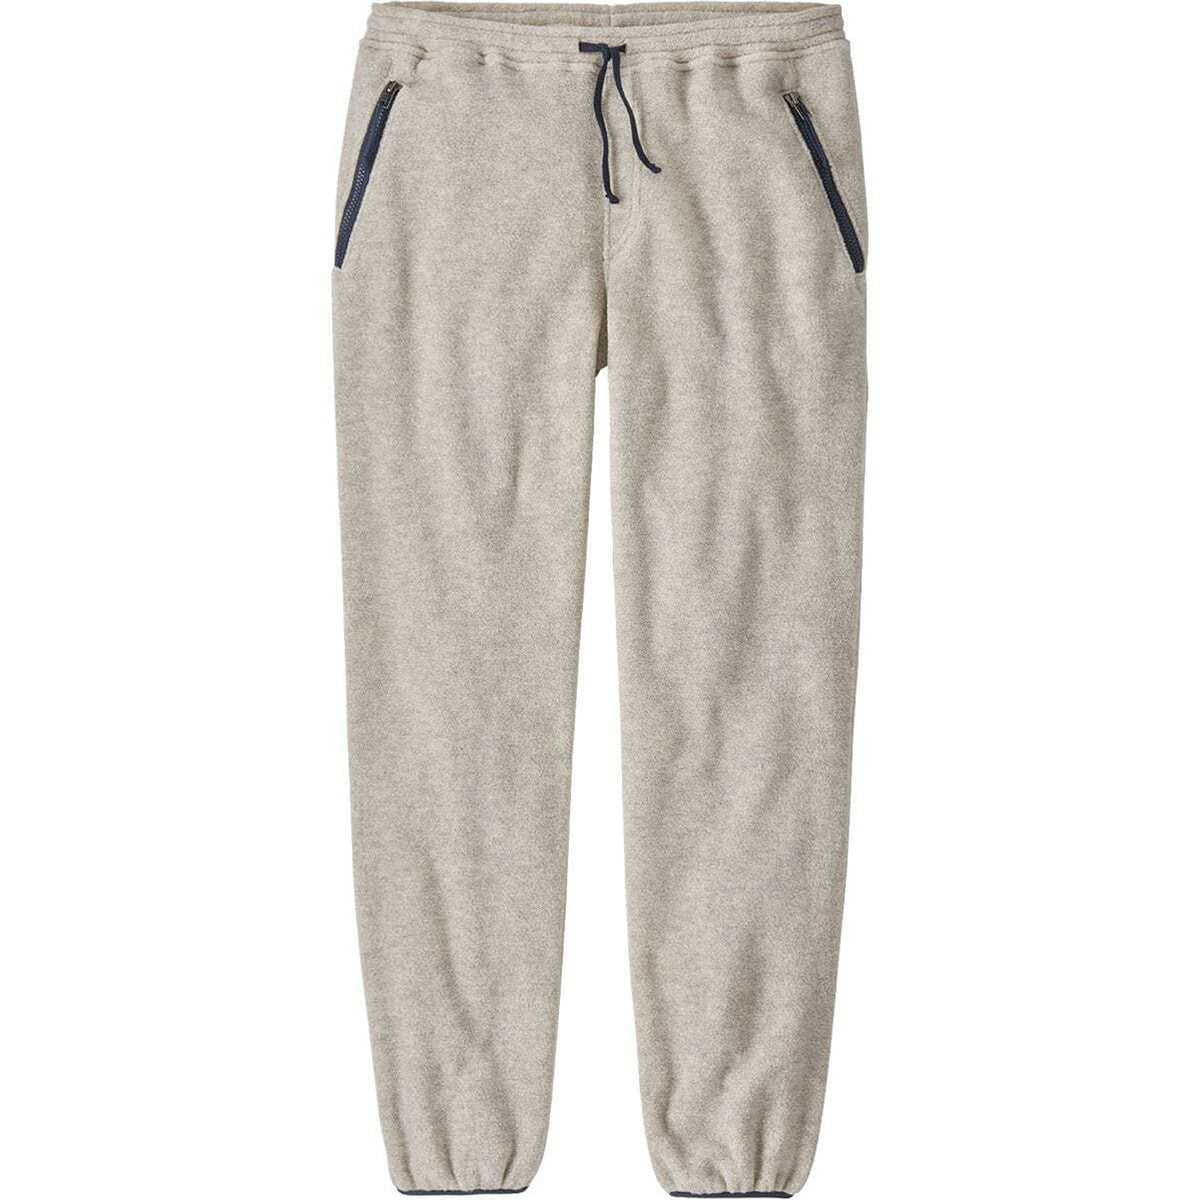 Patagonia Synch Pants - Oatmeal Heather – Stomping Ground